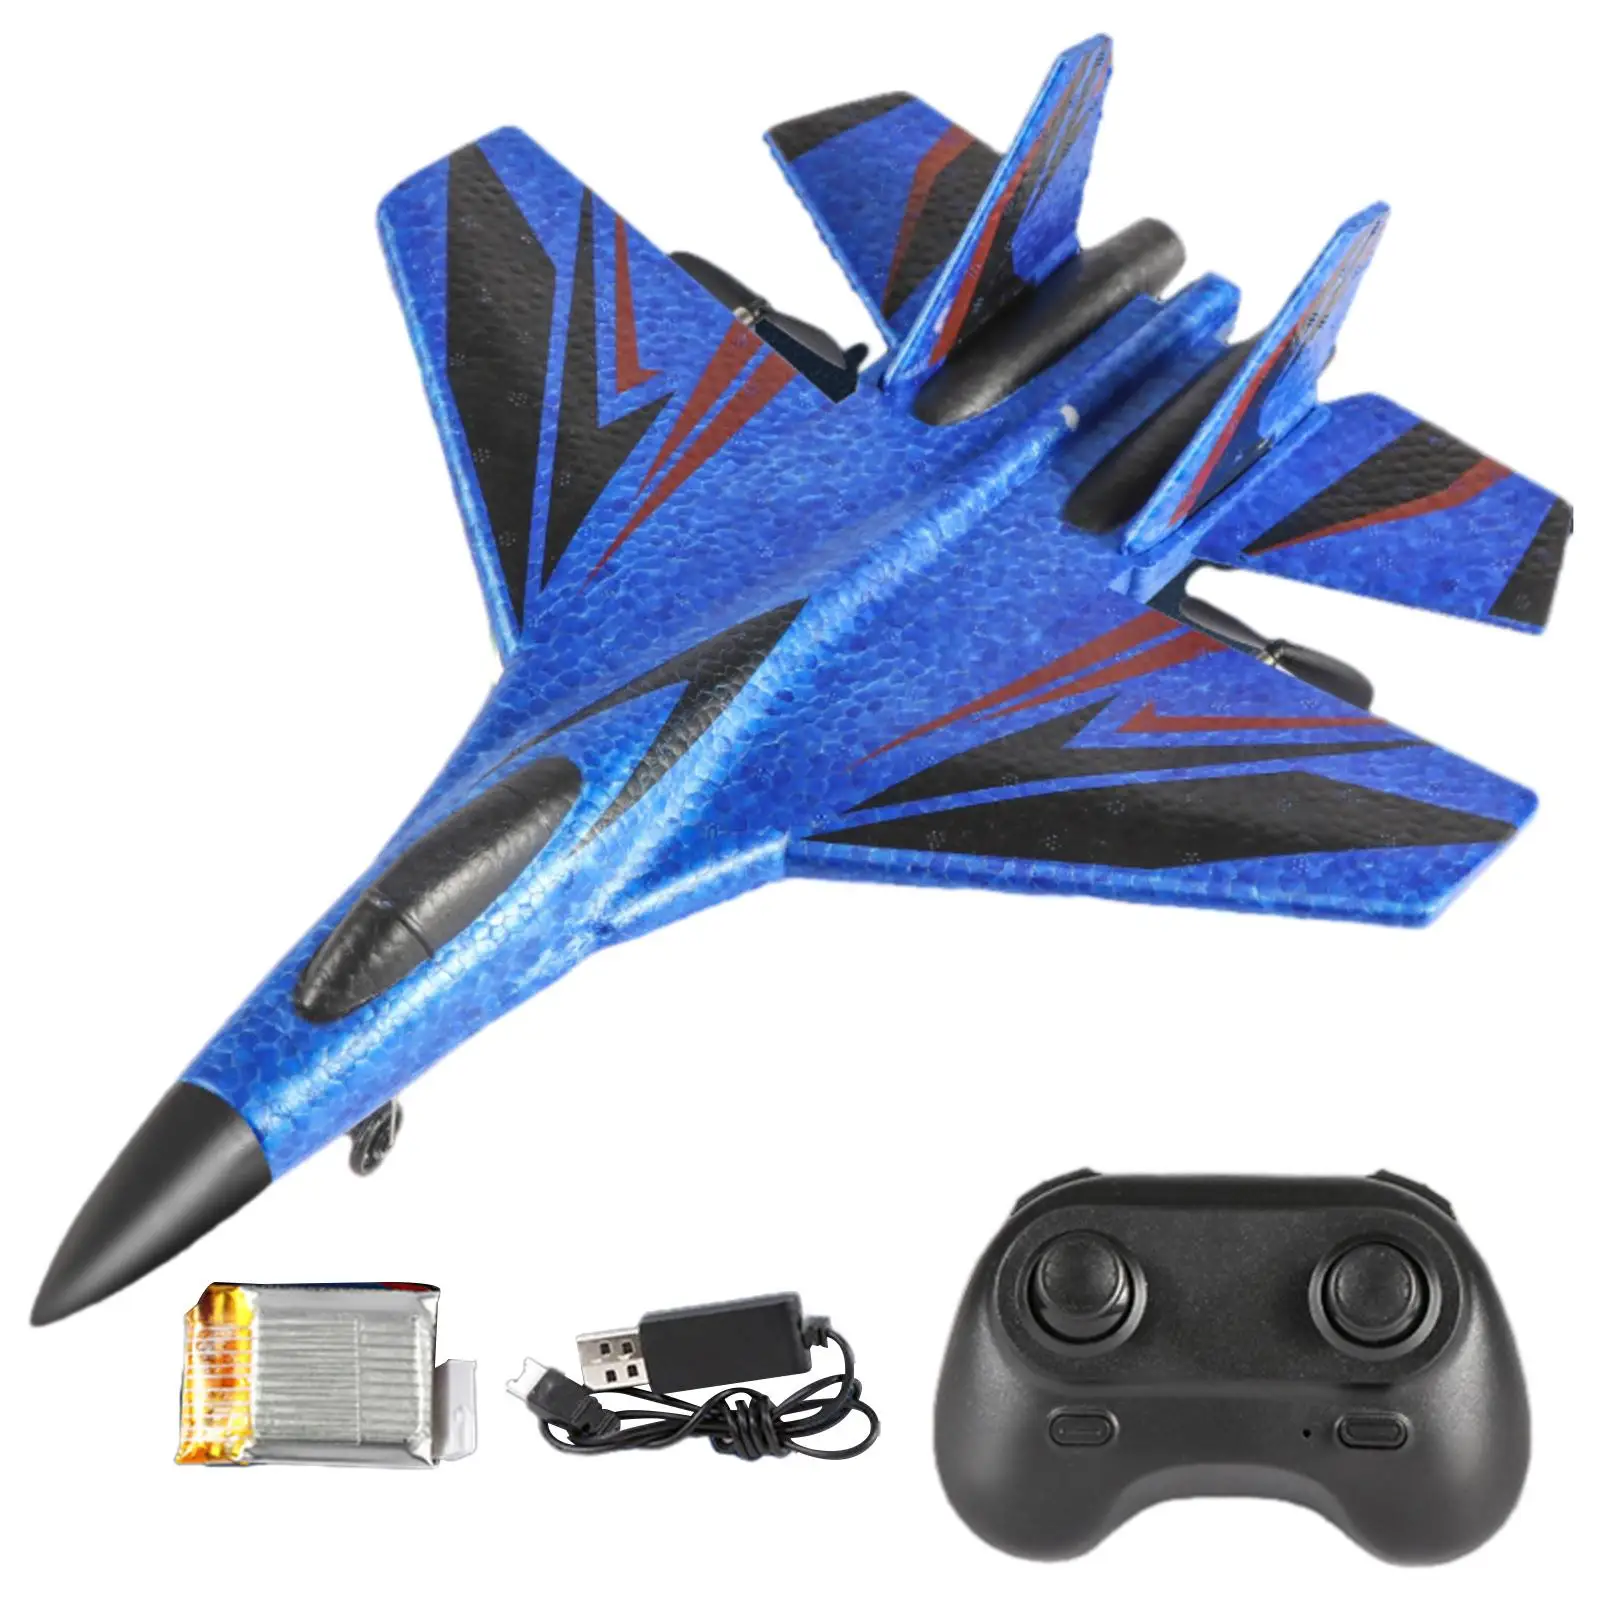 Foam RC Glider SU30 RC Airplane Easy to Control Durable Lightweight Fighter Jet Toy for Kids Beginner Children Boys Girls Adults